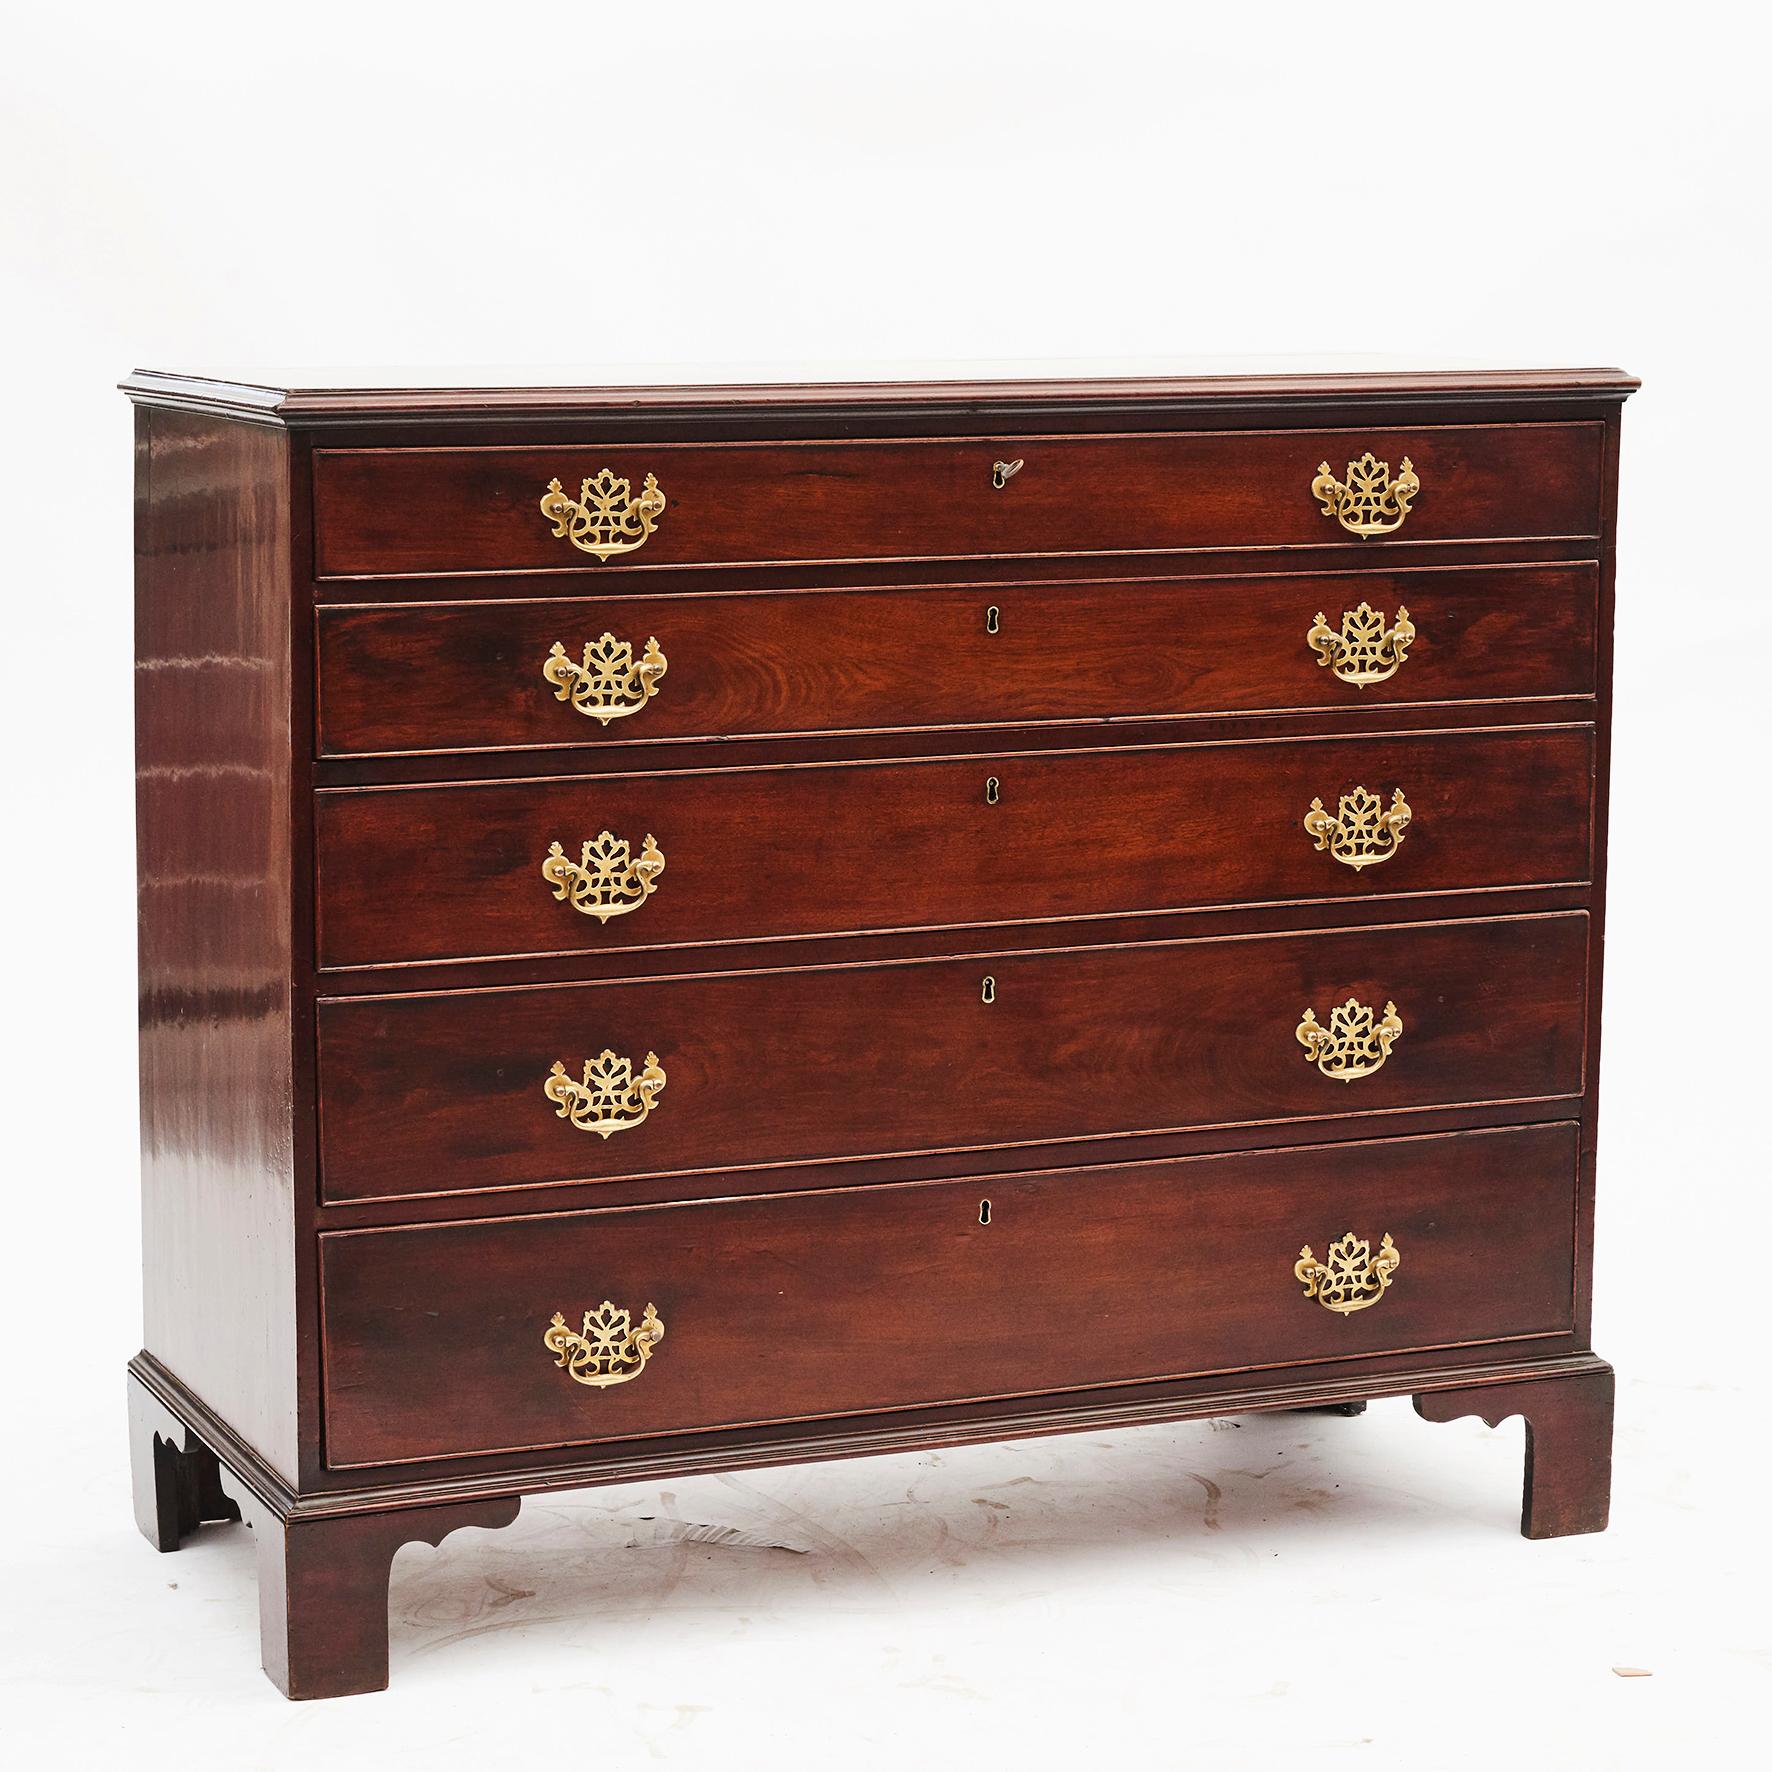 Danish Empire commode made in Regency style. Unique, probably made to order.
Cuba mahogany with gorgeous color and grain and beautiful patina. Original fittings. 5 drawers. High-quality craftsmanship.
Copenhagen, circa 1810.